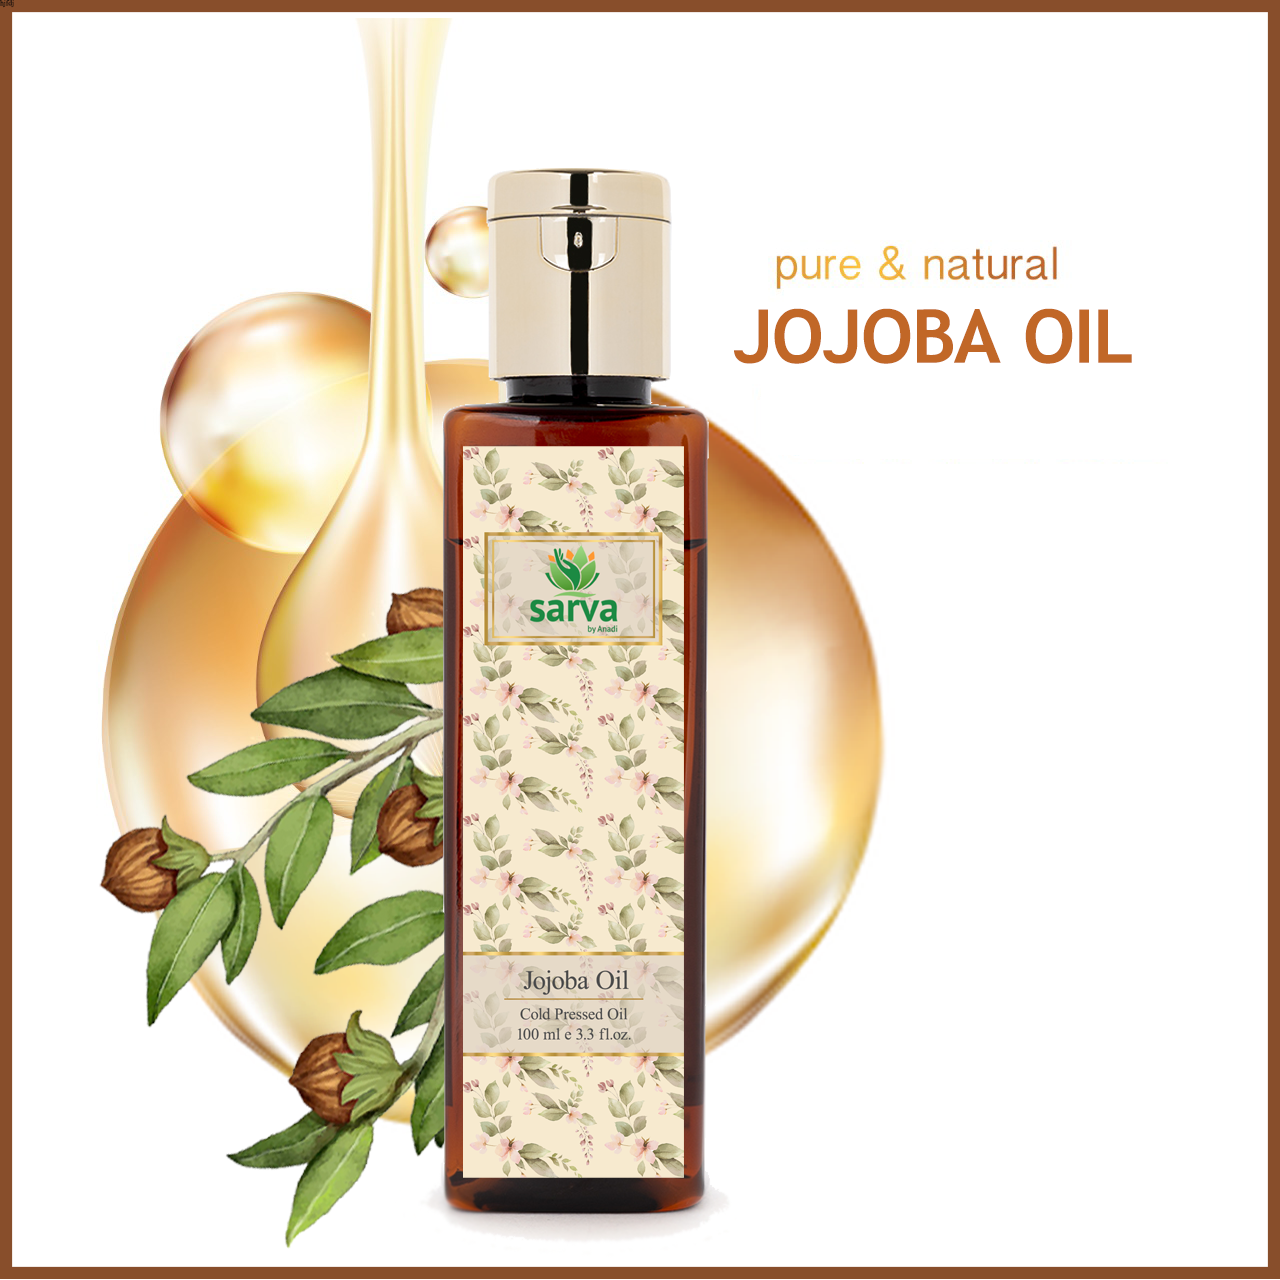 Jojoba hair oil has very Light and Soft Scent, Long Shelf Life ,Very rich in Vitamin E, Moisturizer Quality, Uplifts Hair & Skin Health, and Anti Ageing Qualities. Helps Strengthen Hair | HAir Growth